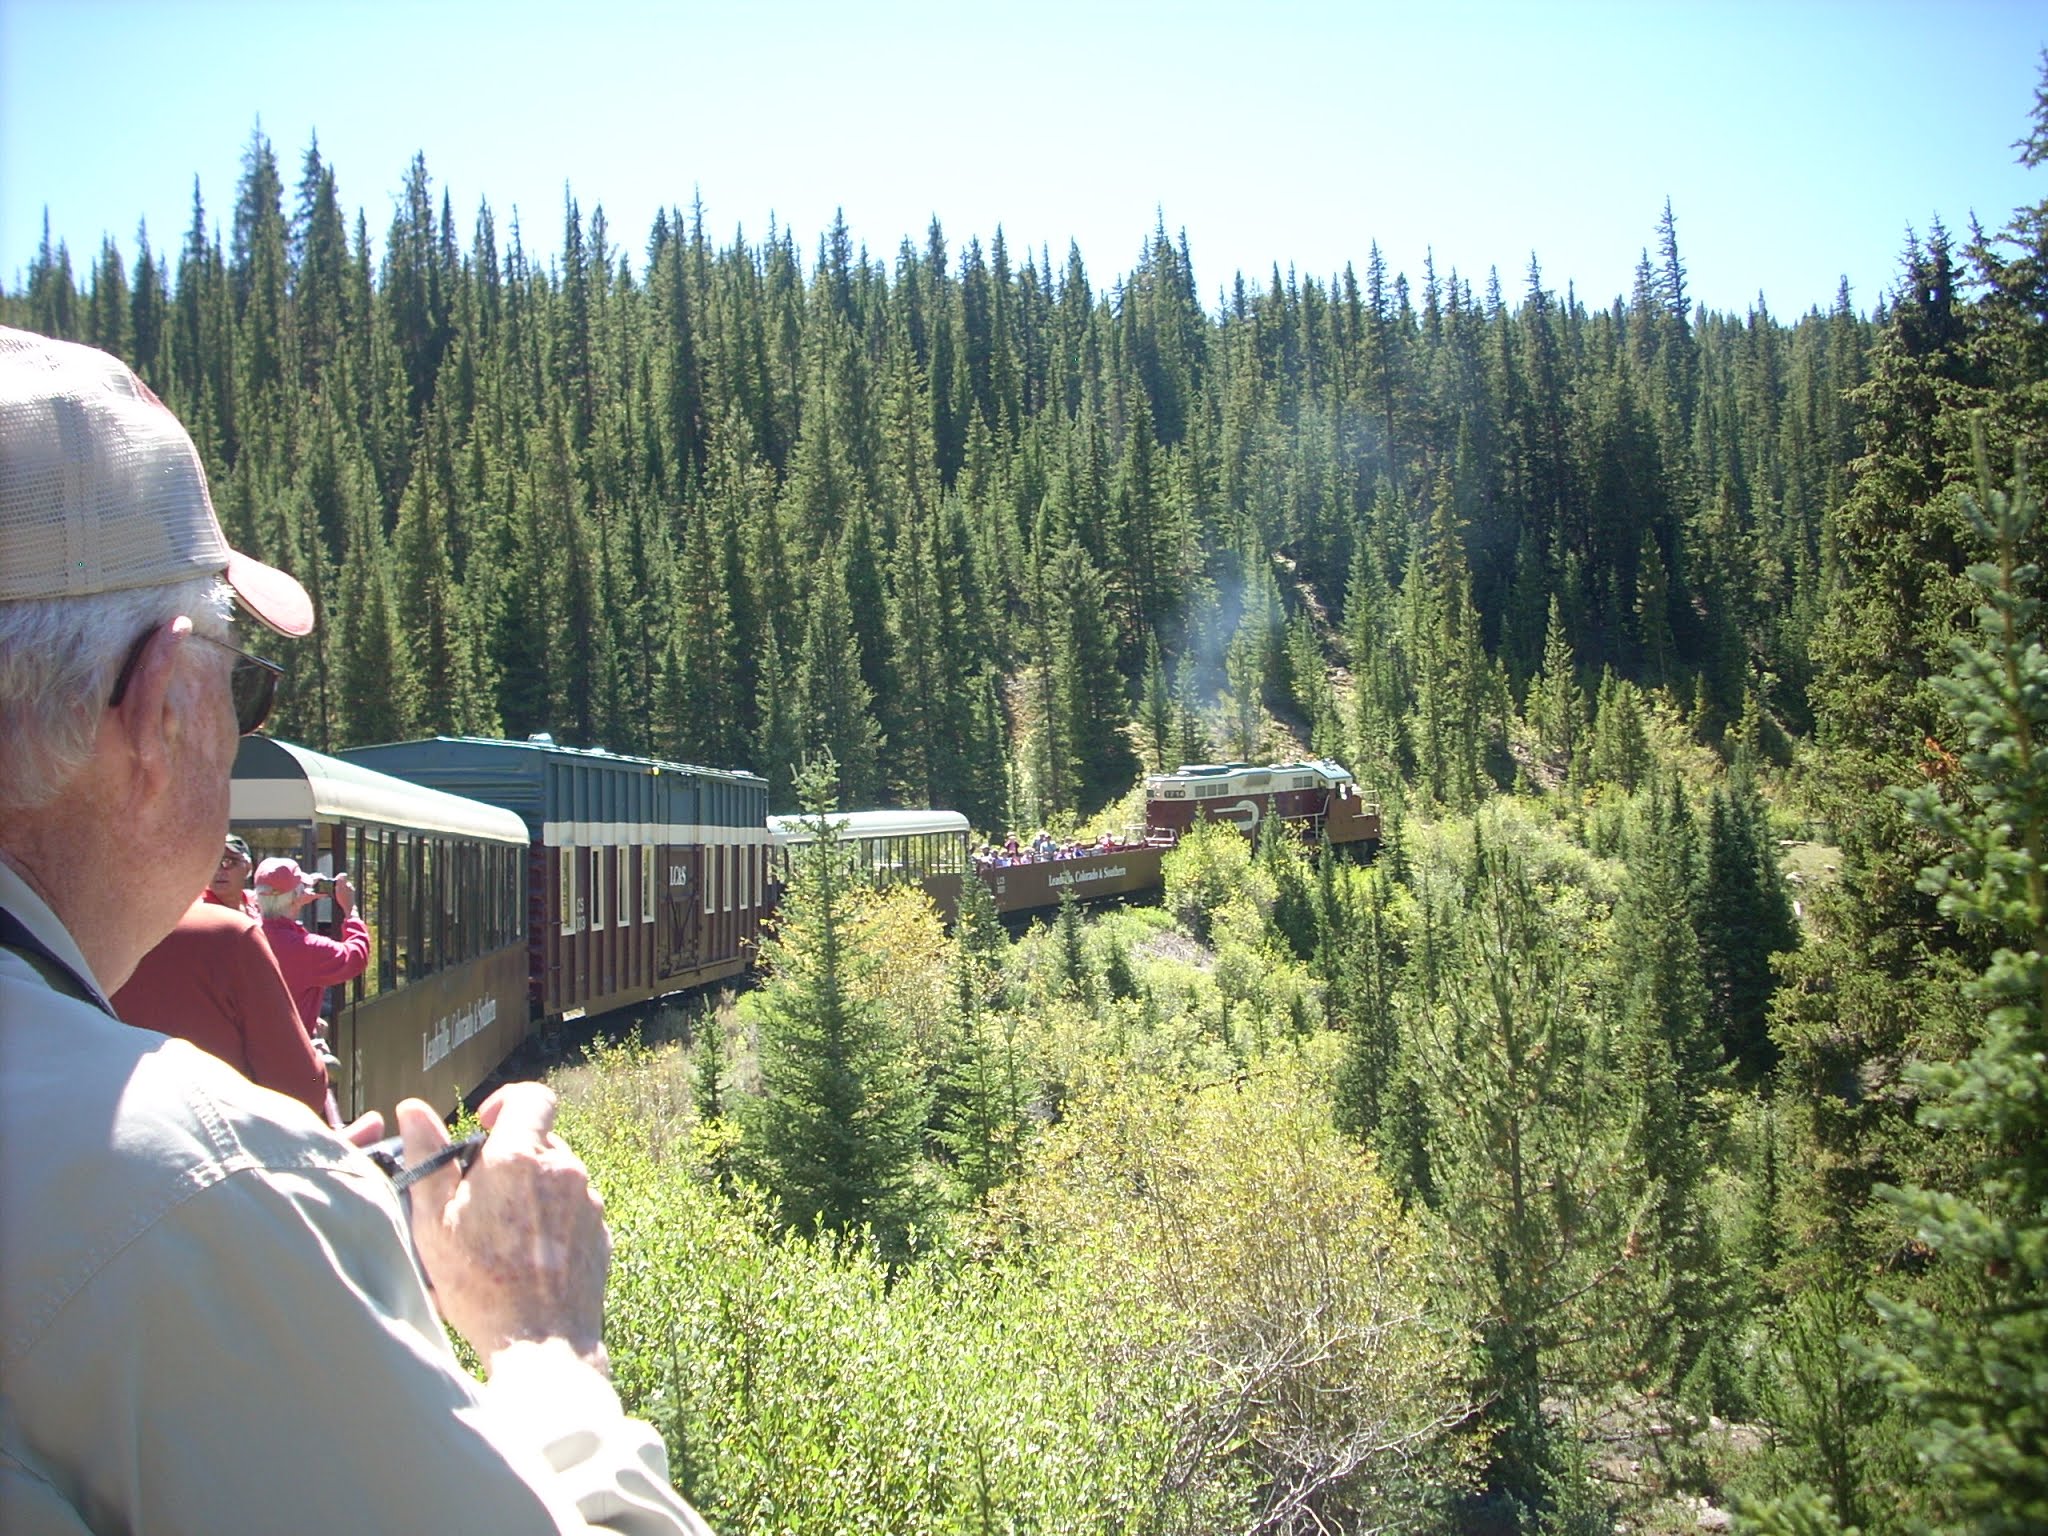 Outdoor photo of a train ride in the mountains on a sunny day with guests taking photos of the scenery.